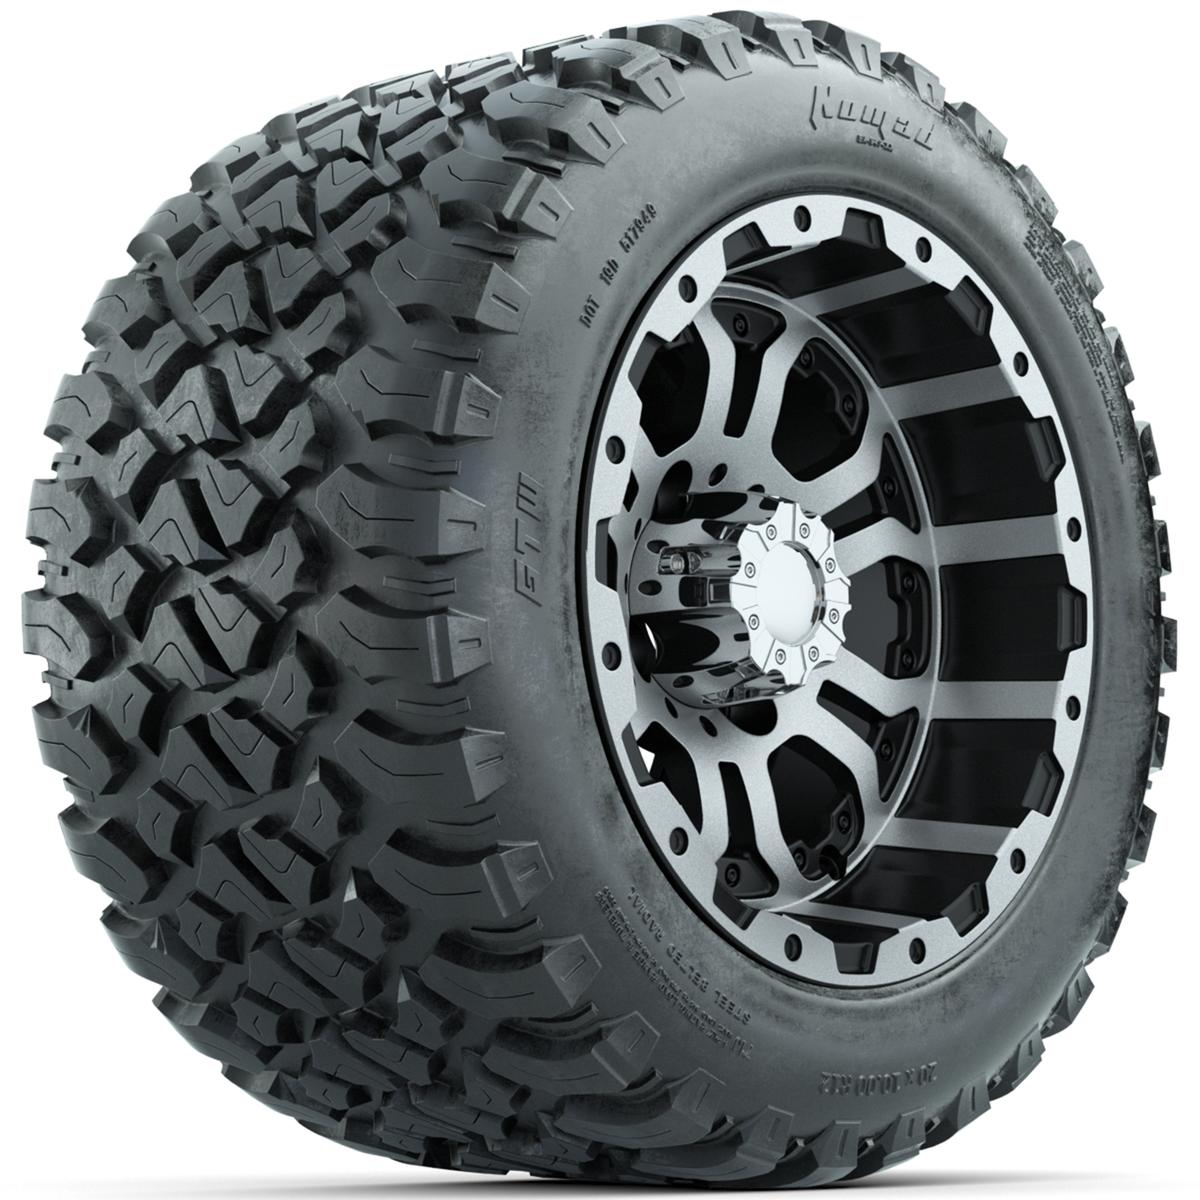 Set of (4) 12 in GTW Omega Wheels with 20x10-R12 GTW Nomad All-Terrain Tires